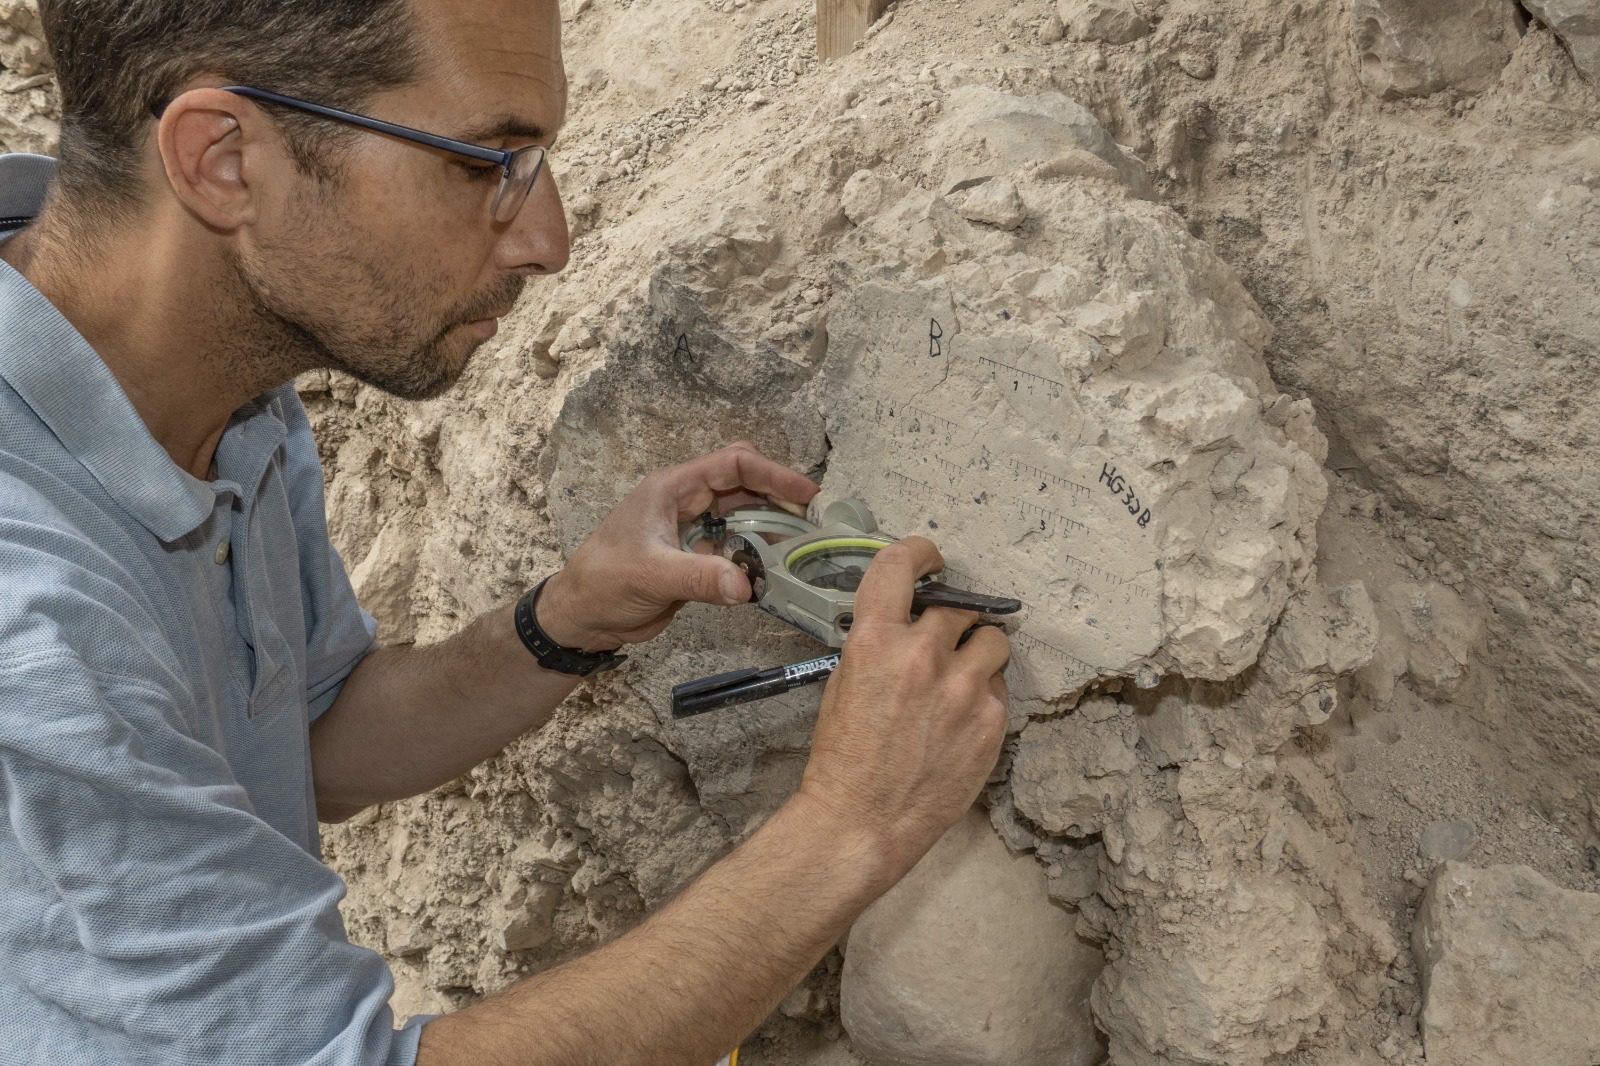 Yoav Vaknin measuring at the site of one of the destroyed cities, whose date of destruction has been provided by the magnetization encoded there. Image Credit: Shai Halevi, Israel Antiquities Authority